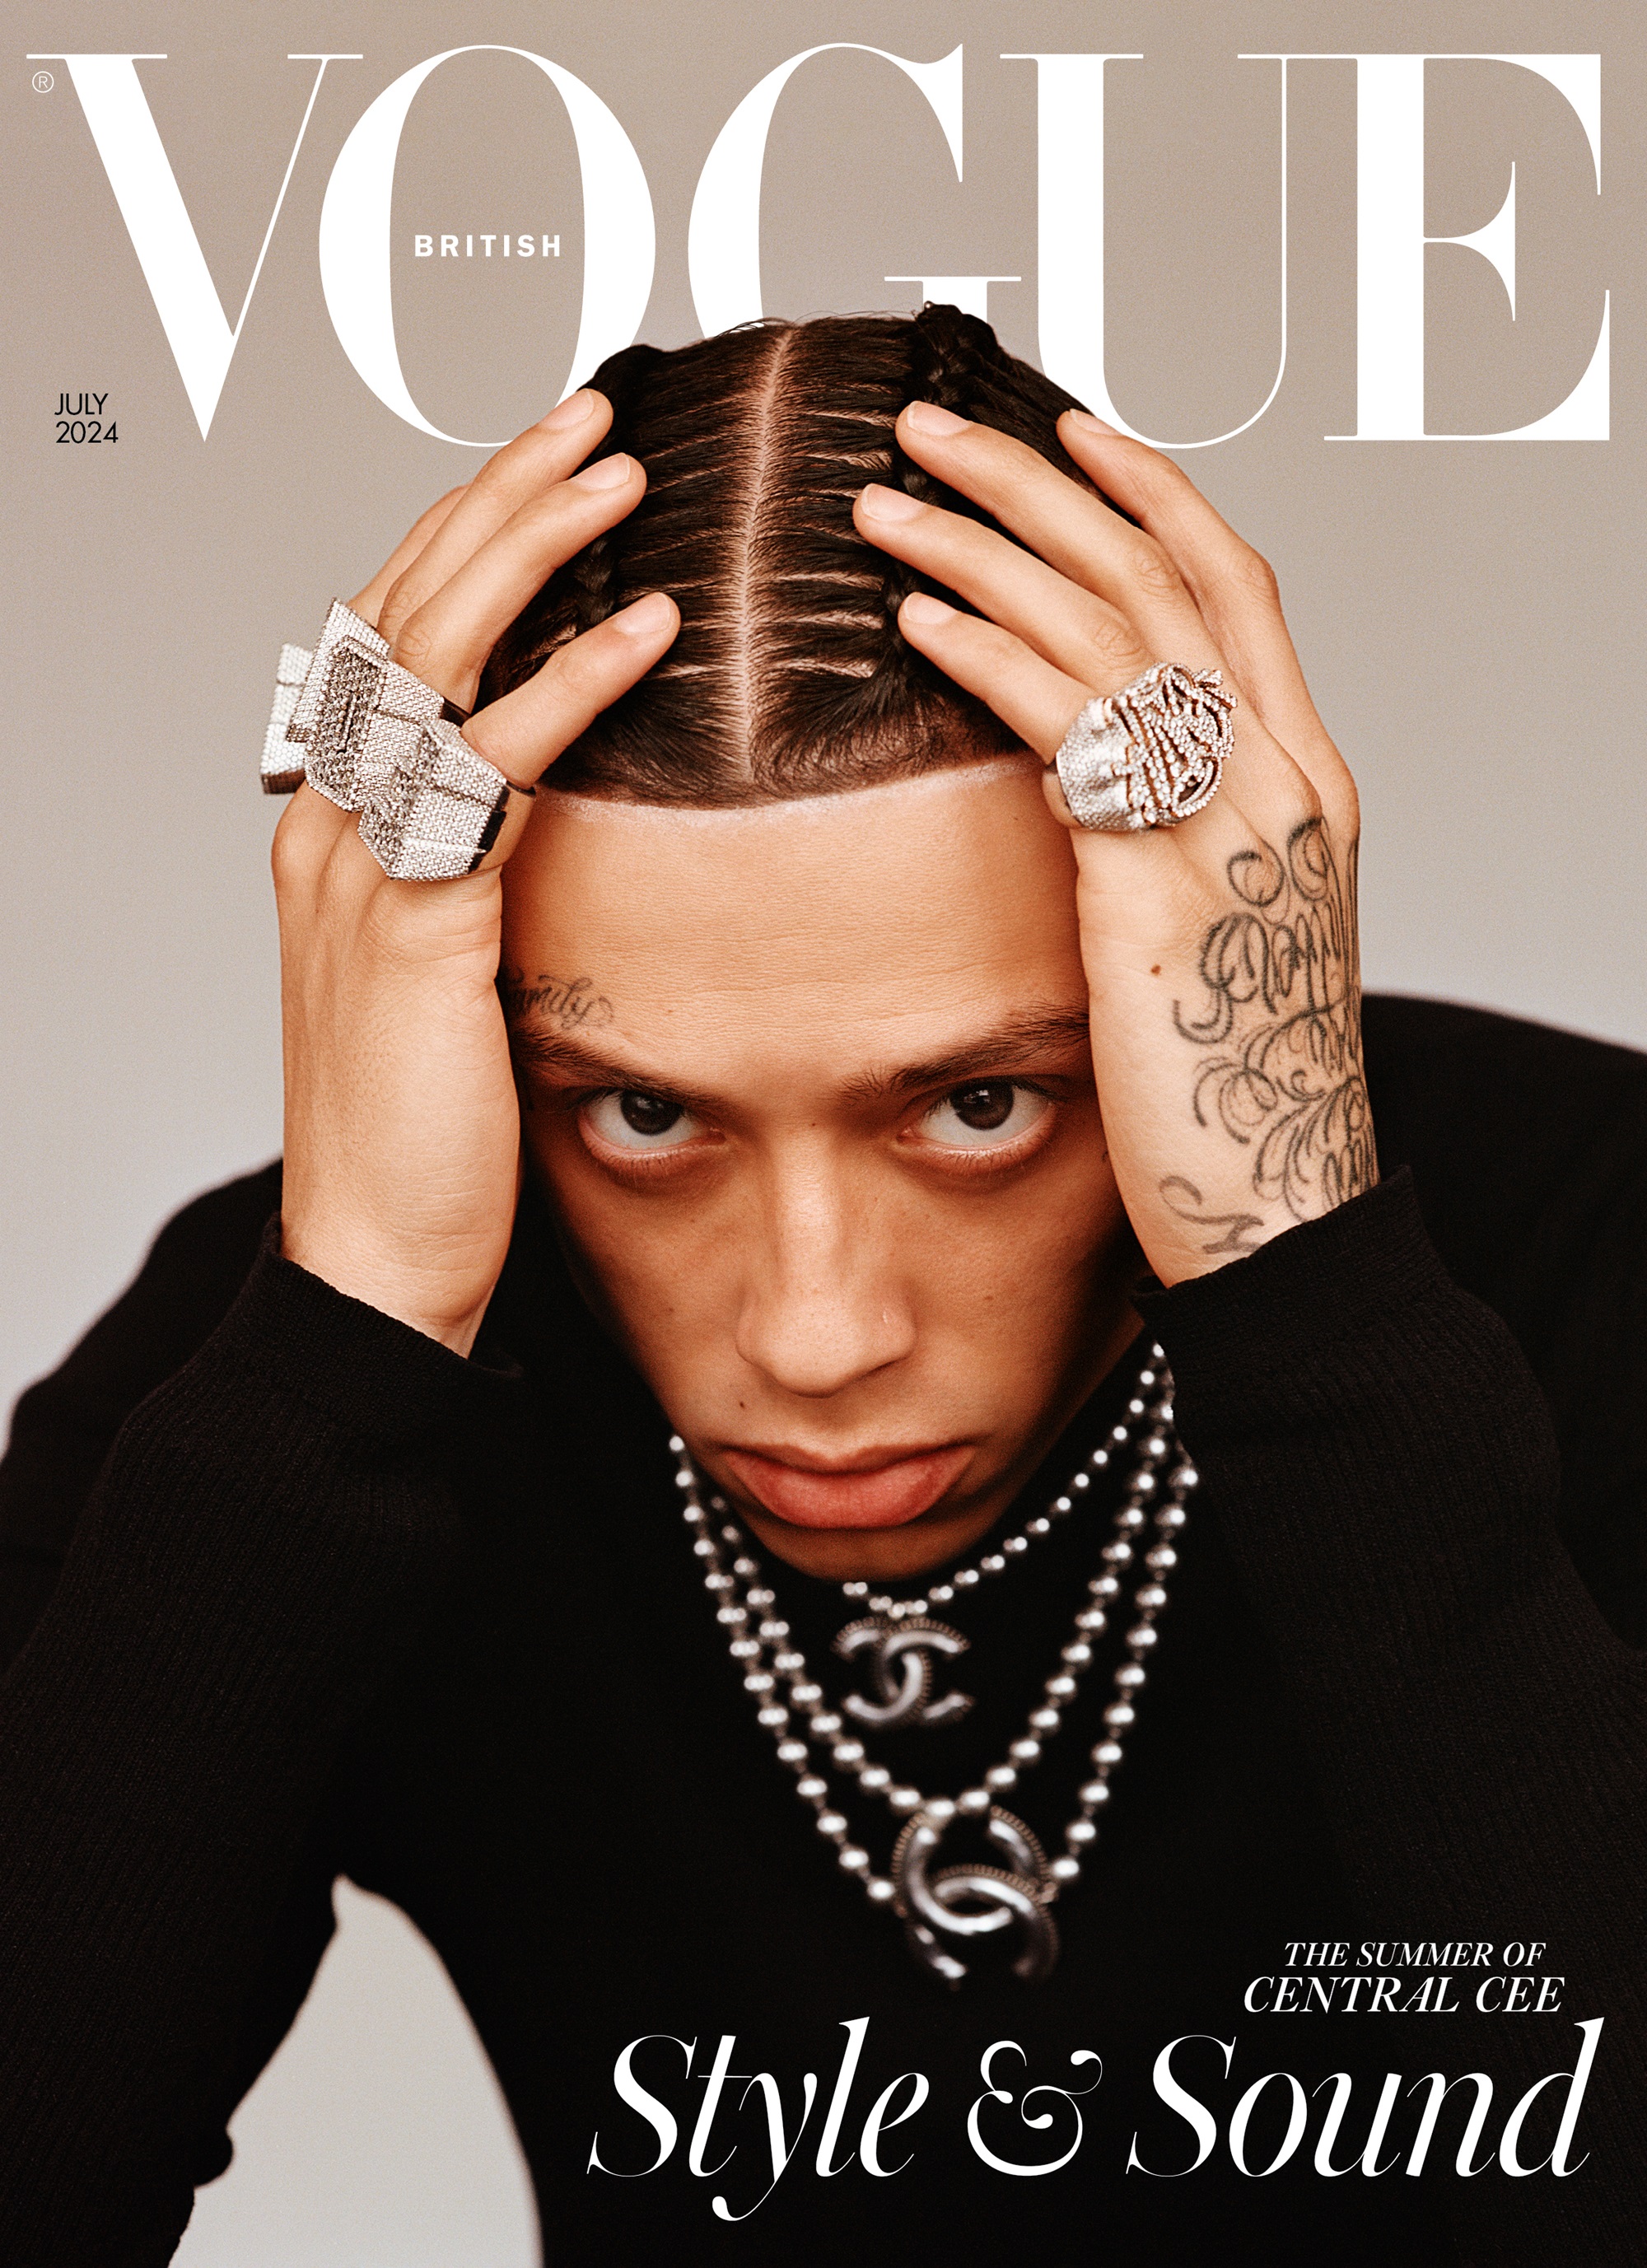 Rapper Central Cee on the cover of British Vogue's July edition 